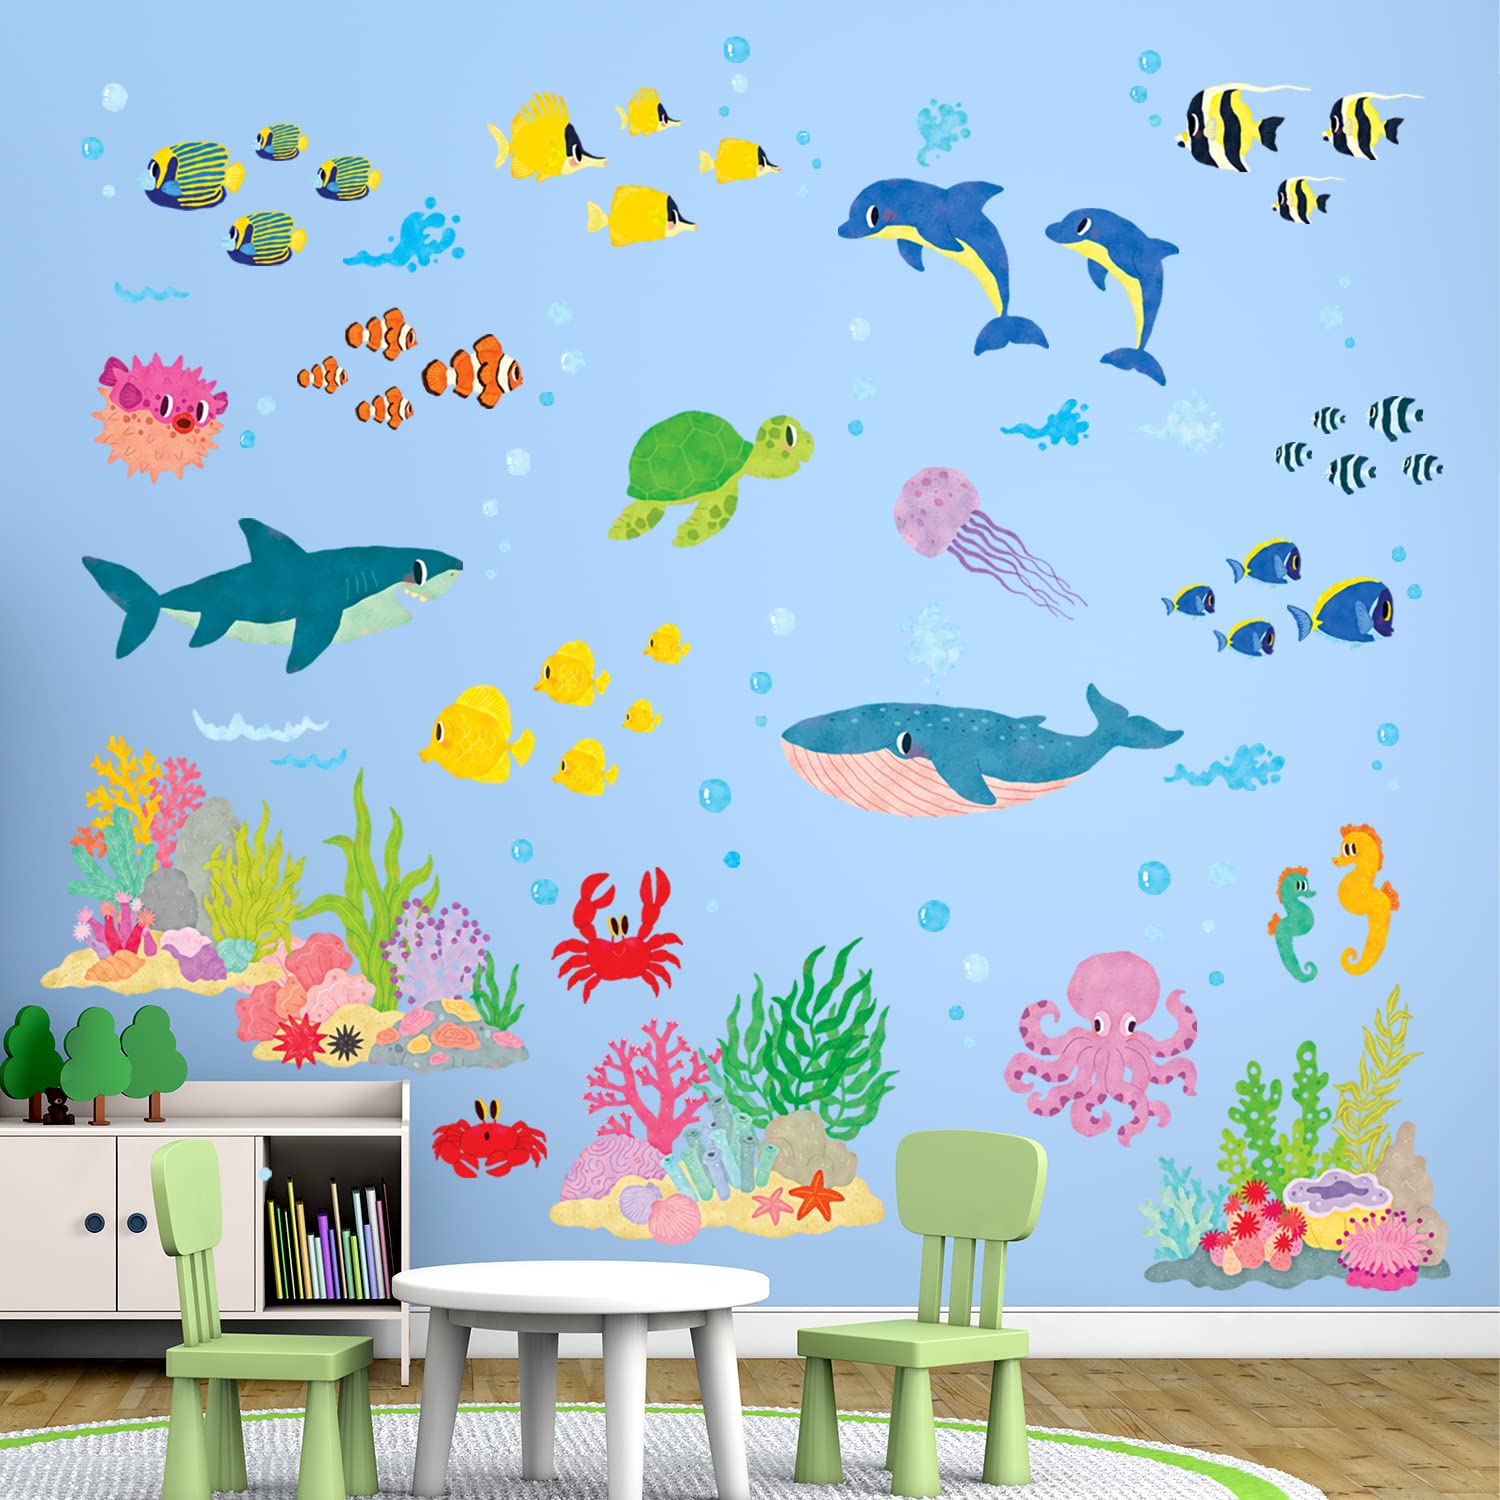 DECOWALL DW-2014 Under the Sea Kids Wall Stickers Decals Peel and Stick Removable for Nursery Bedroom Living Room art murals decorations